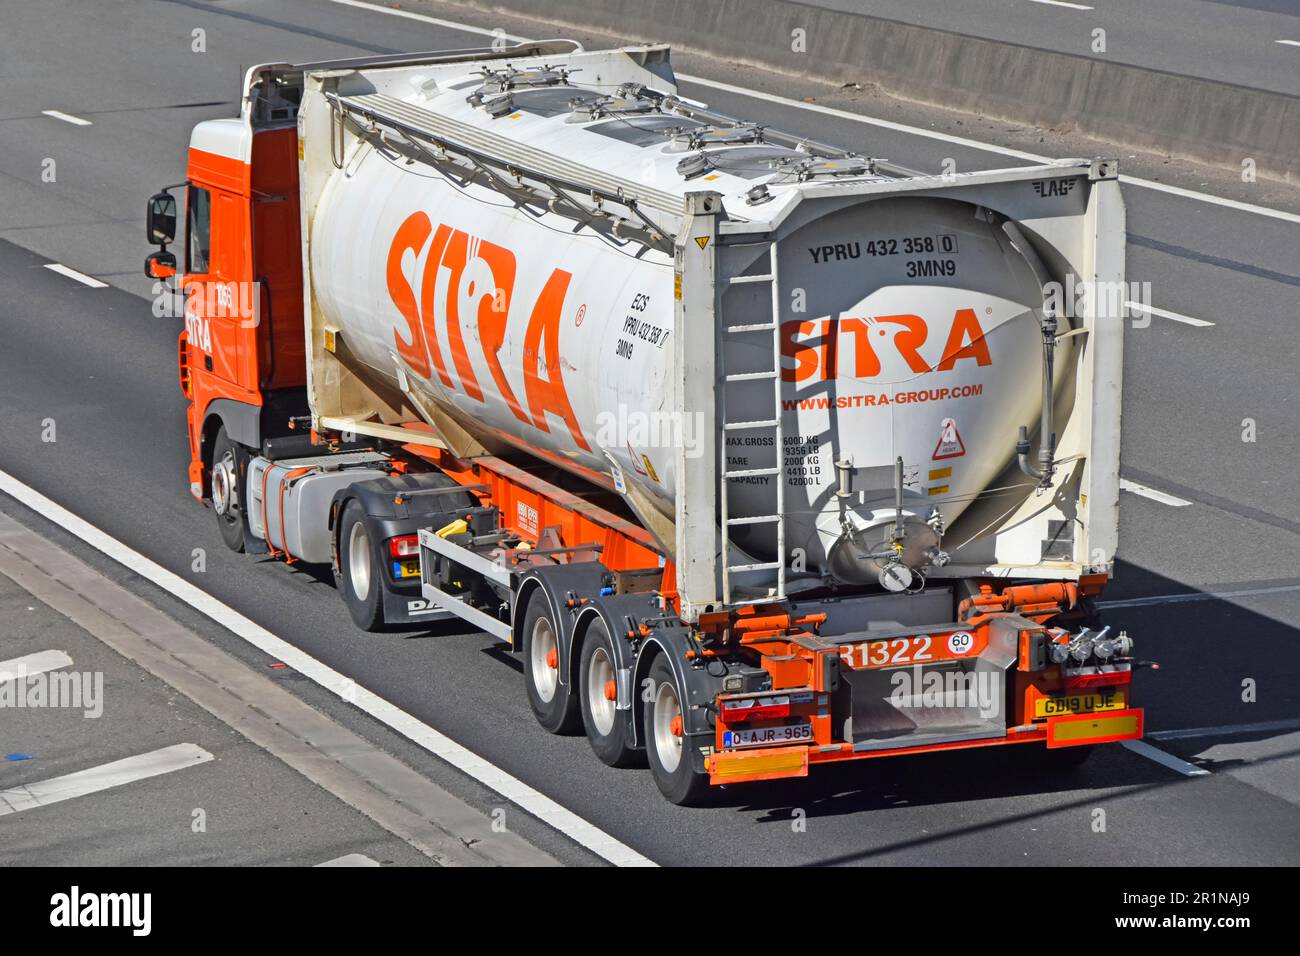 Side back rear aerial view Sitra logo on DAF tanker hgv lorry truck part of a supply chain transport specialist business driving along m25 motorway UK Stock Photo